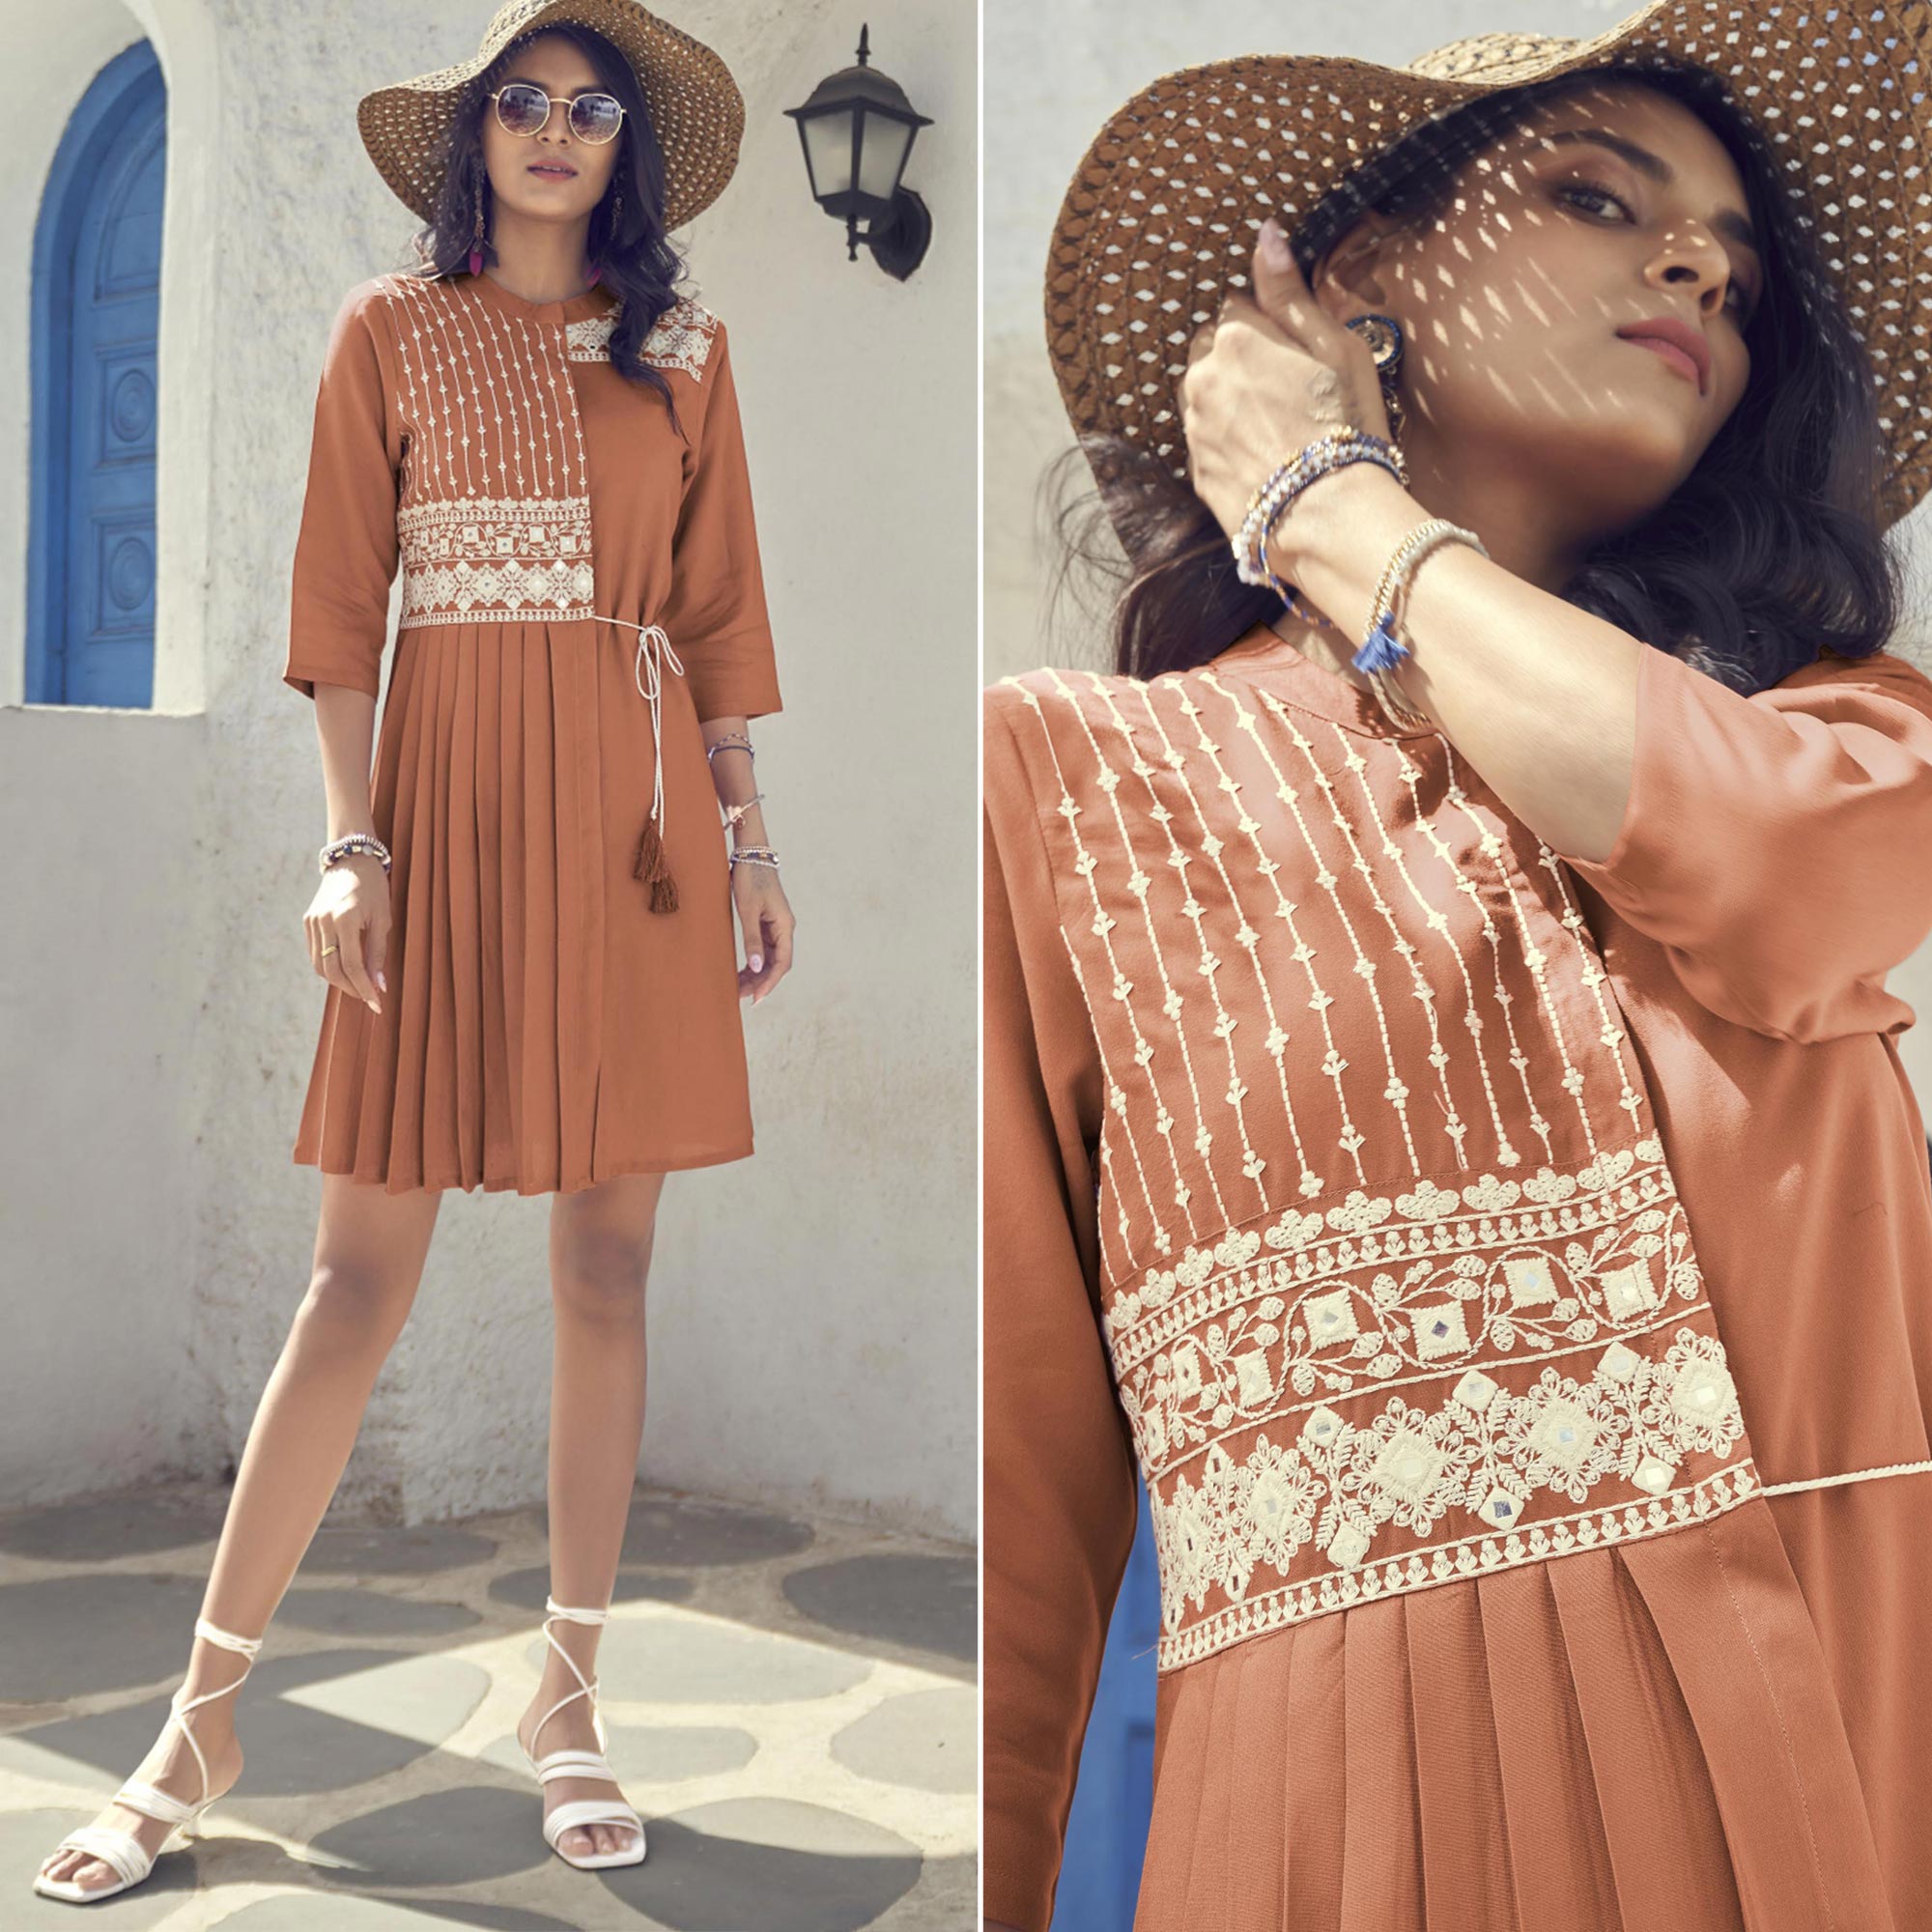 Rust Embroidered Rayon Tunic